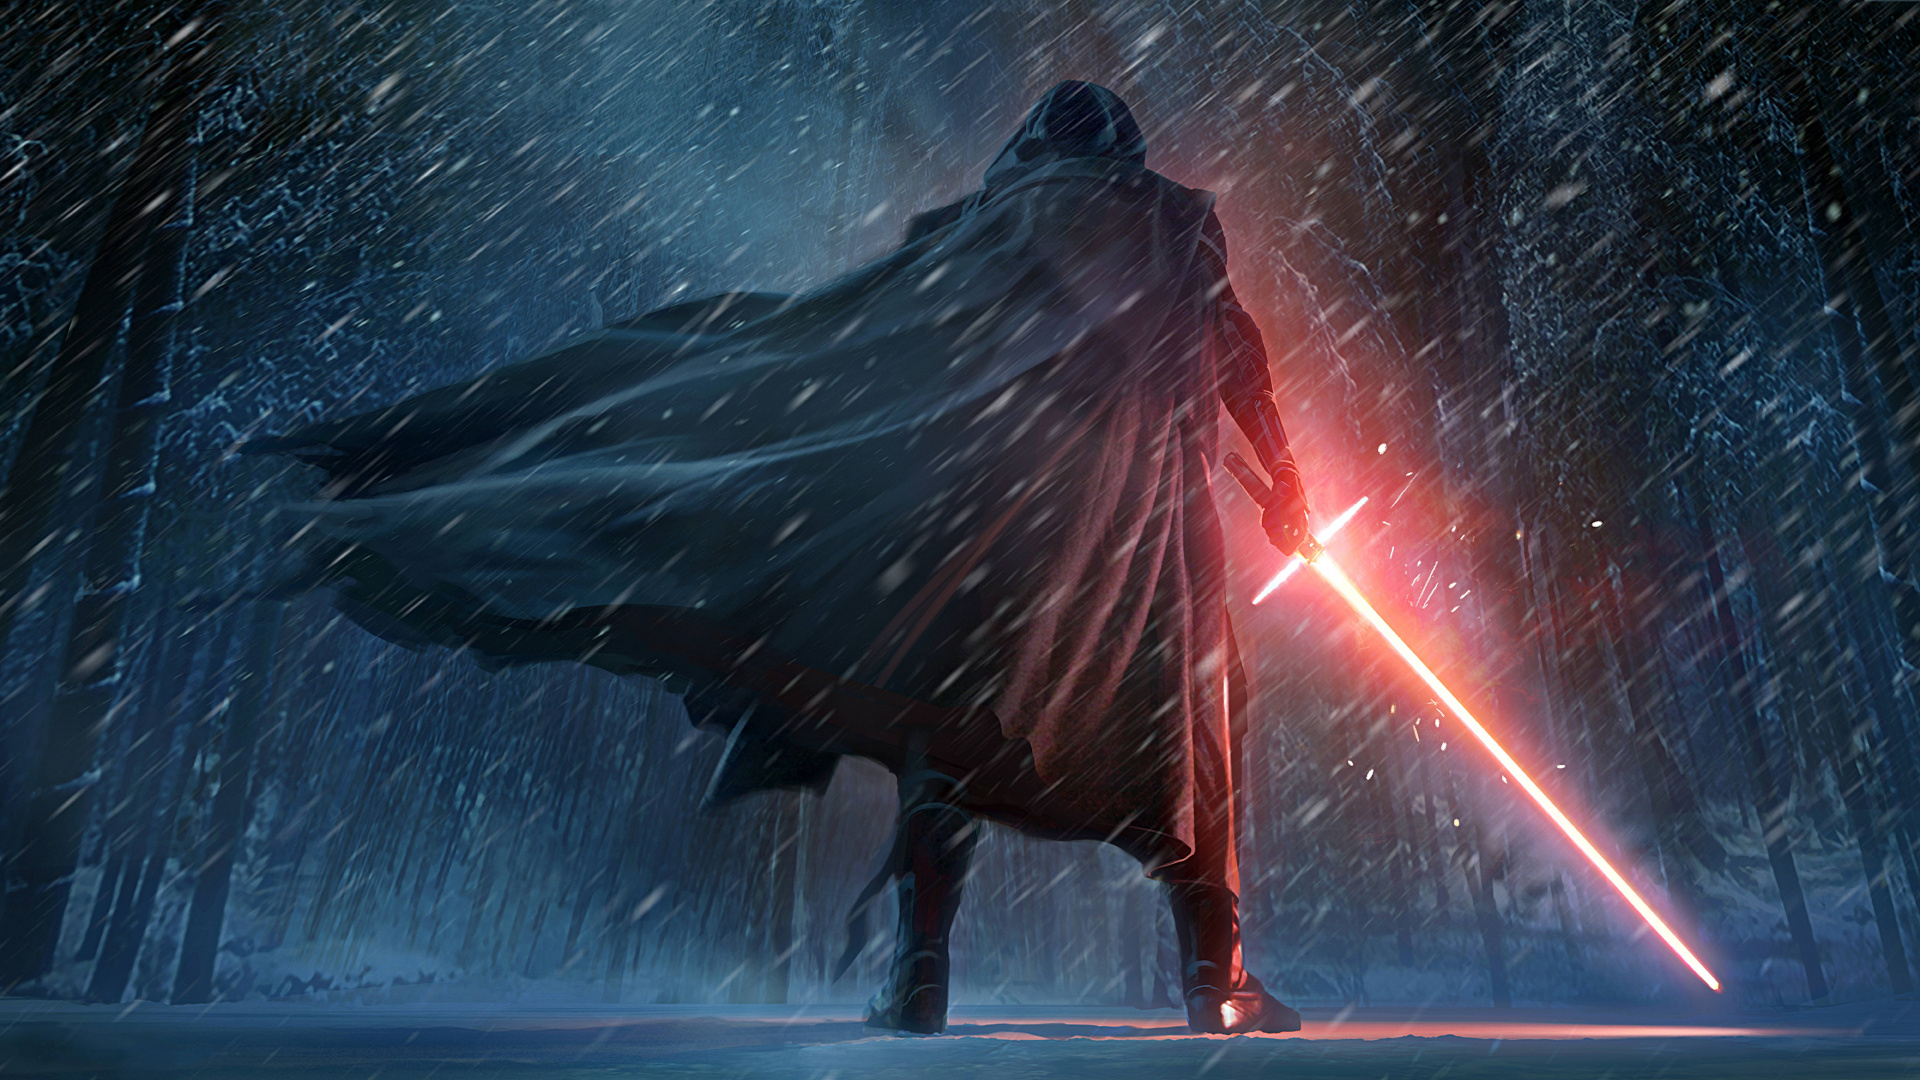 Star Wars, The Force, Space, Darkness, World. Wallpaper in 1920x1080 Resolution